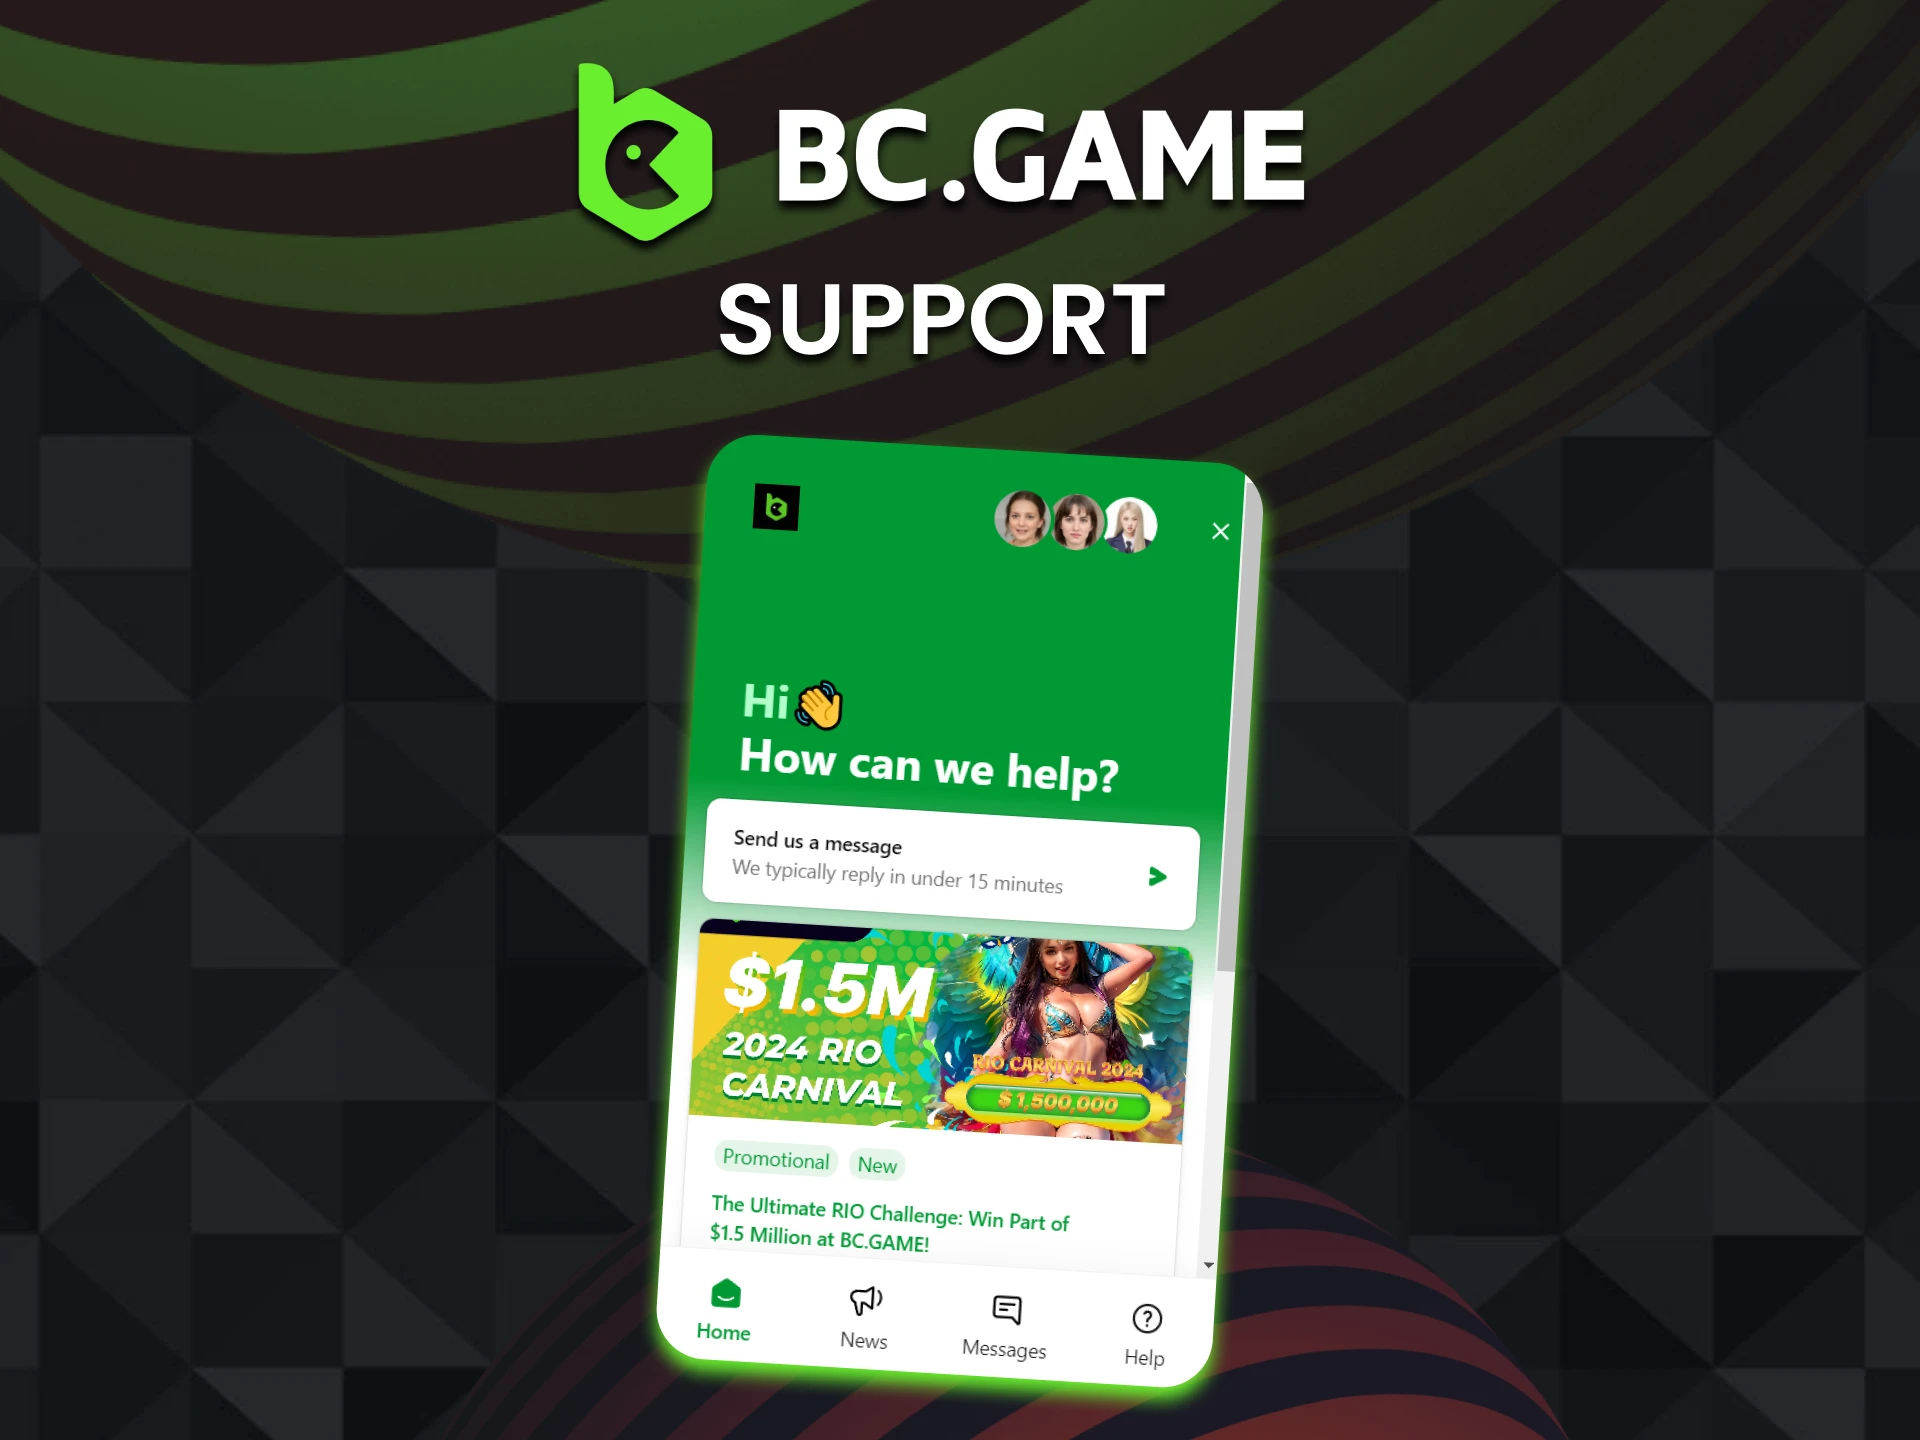 We will tell you how to contact the BCGame support team.